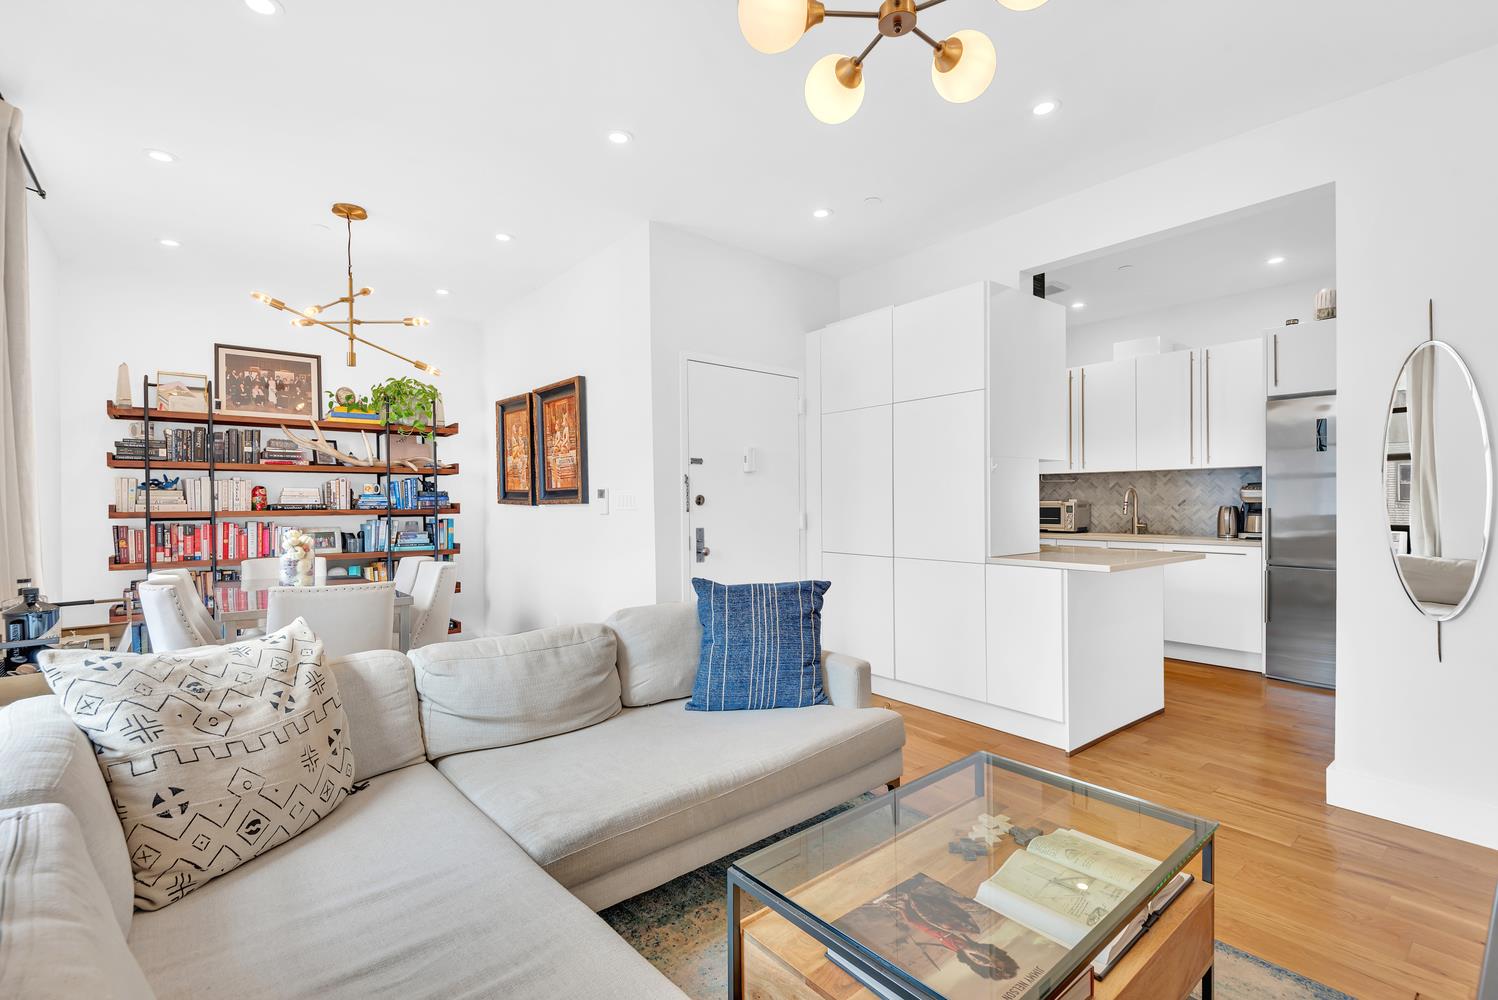 199 West 134th Street 5, Central Harlem, Upper Manhattan, NYC - 2 Bedrooms  
1 Bathrooms  
3 Rooms - 